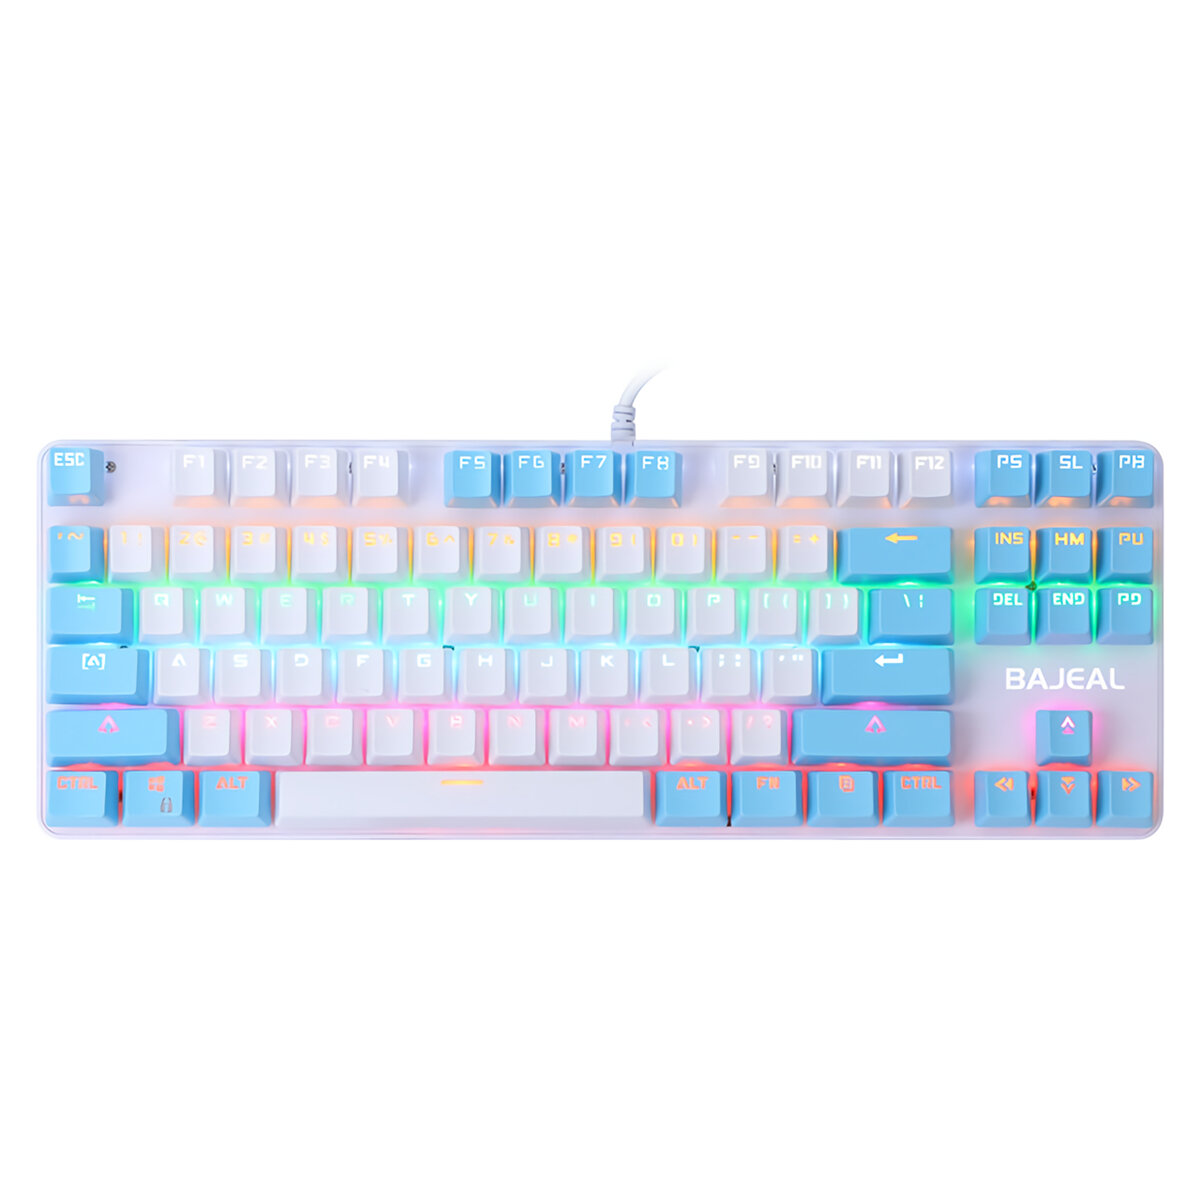 BAJEAL K100 Mechanical Keyboard Wired 87 Keys Rainbow Backlight Blue Swtich Hot Swappable Dual Color Design Gaming Keyboard With LED Lighting Effect for Gaming Typing Office